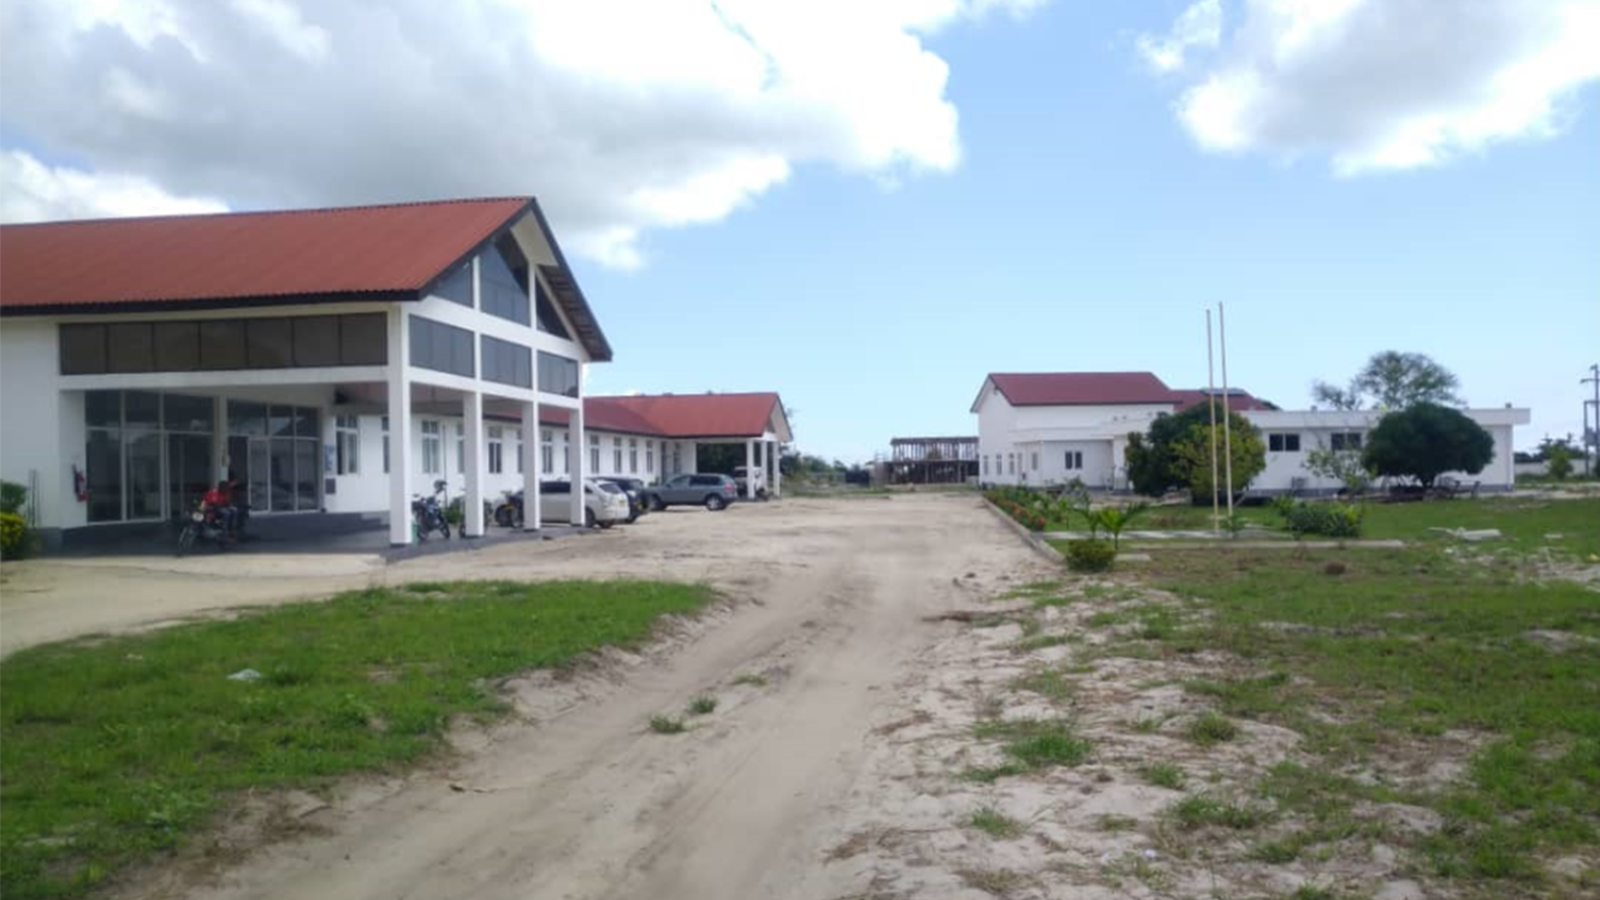 The Ifakara Health Institute's Bagamoyo Research and Training Centre contains a BSL-3 lab and conducts clinical trials, including recent safety trials for malaria vaccines as part of IHI's large anti-malarial program